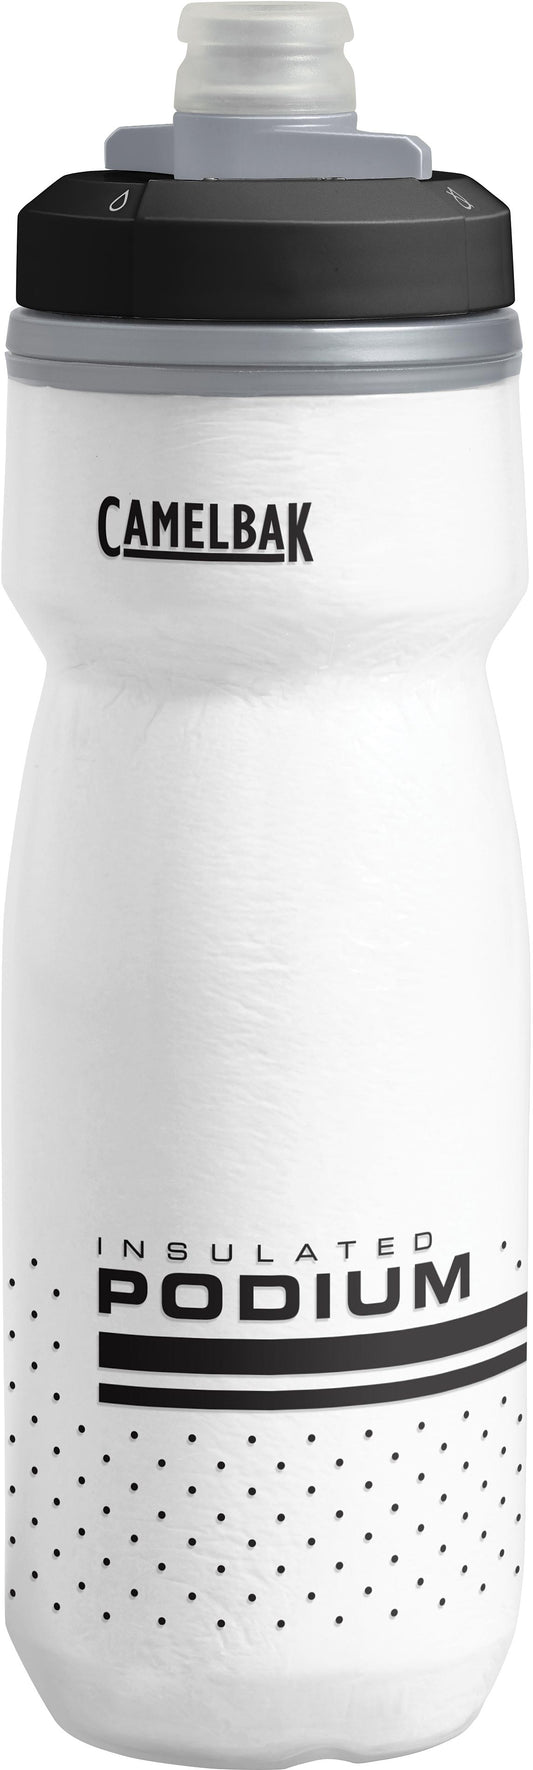 CAMELBAK PODIUM CHILL 21OZ WHITE/BLACK - PrepTakers - Survival and Outdoor Information & Products